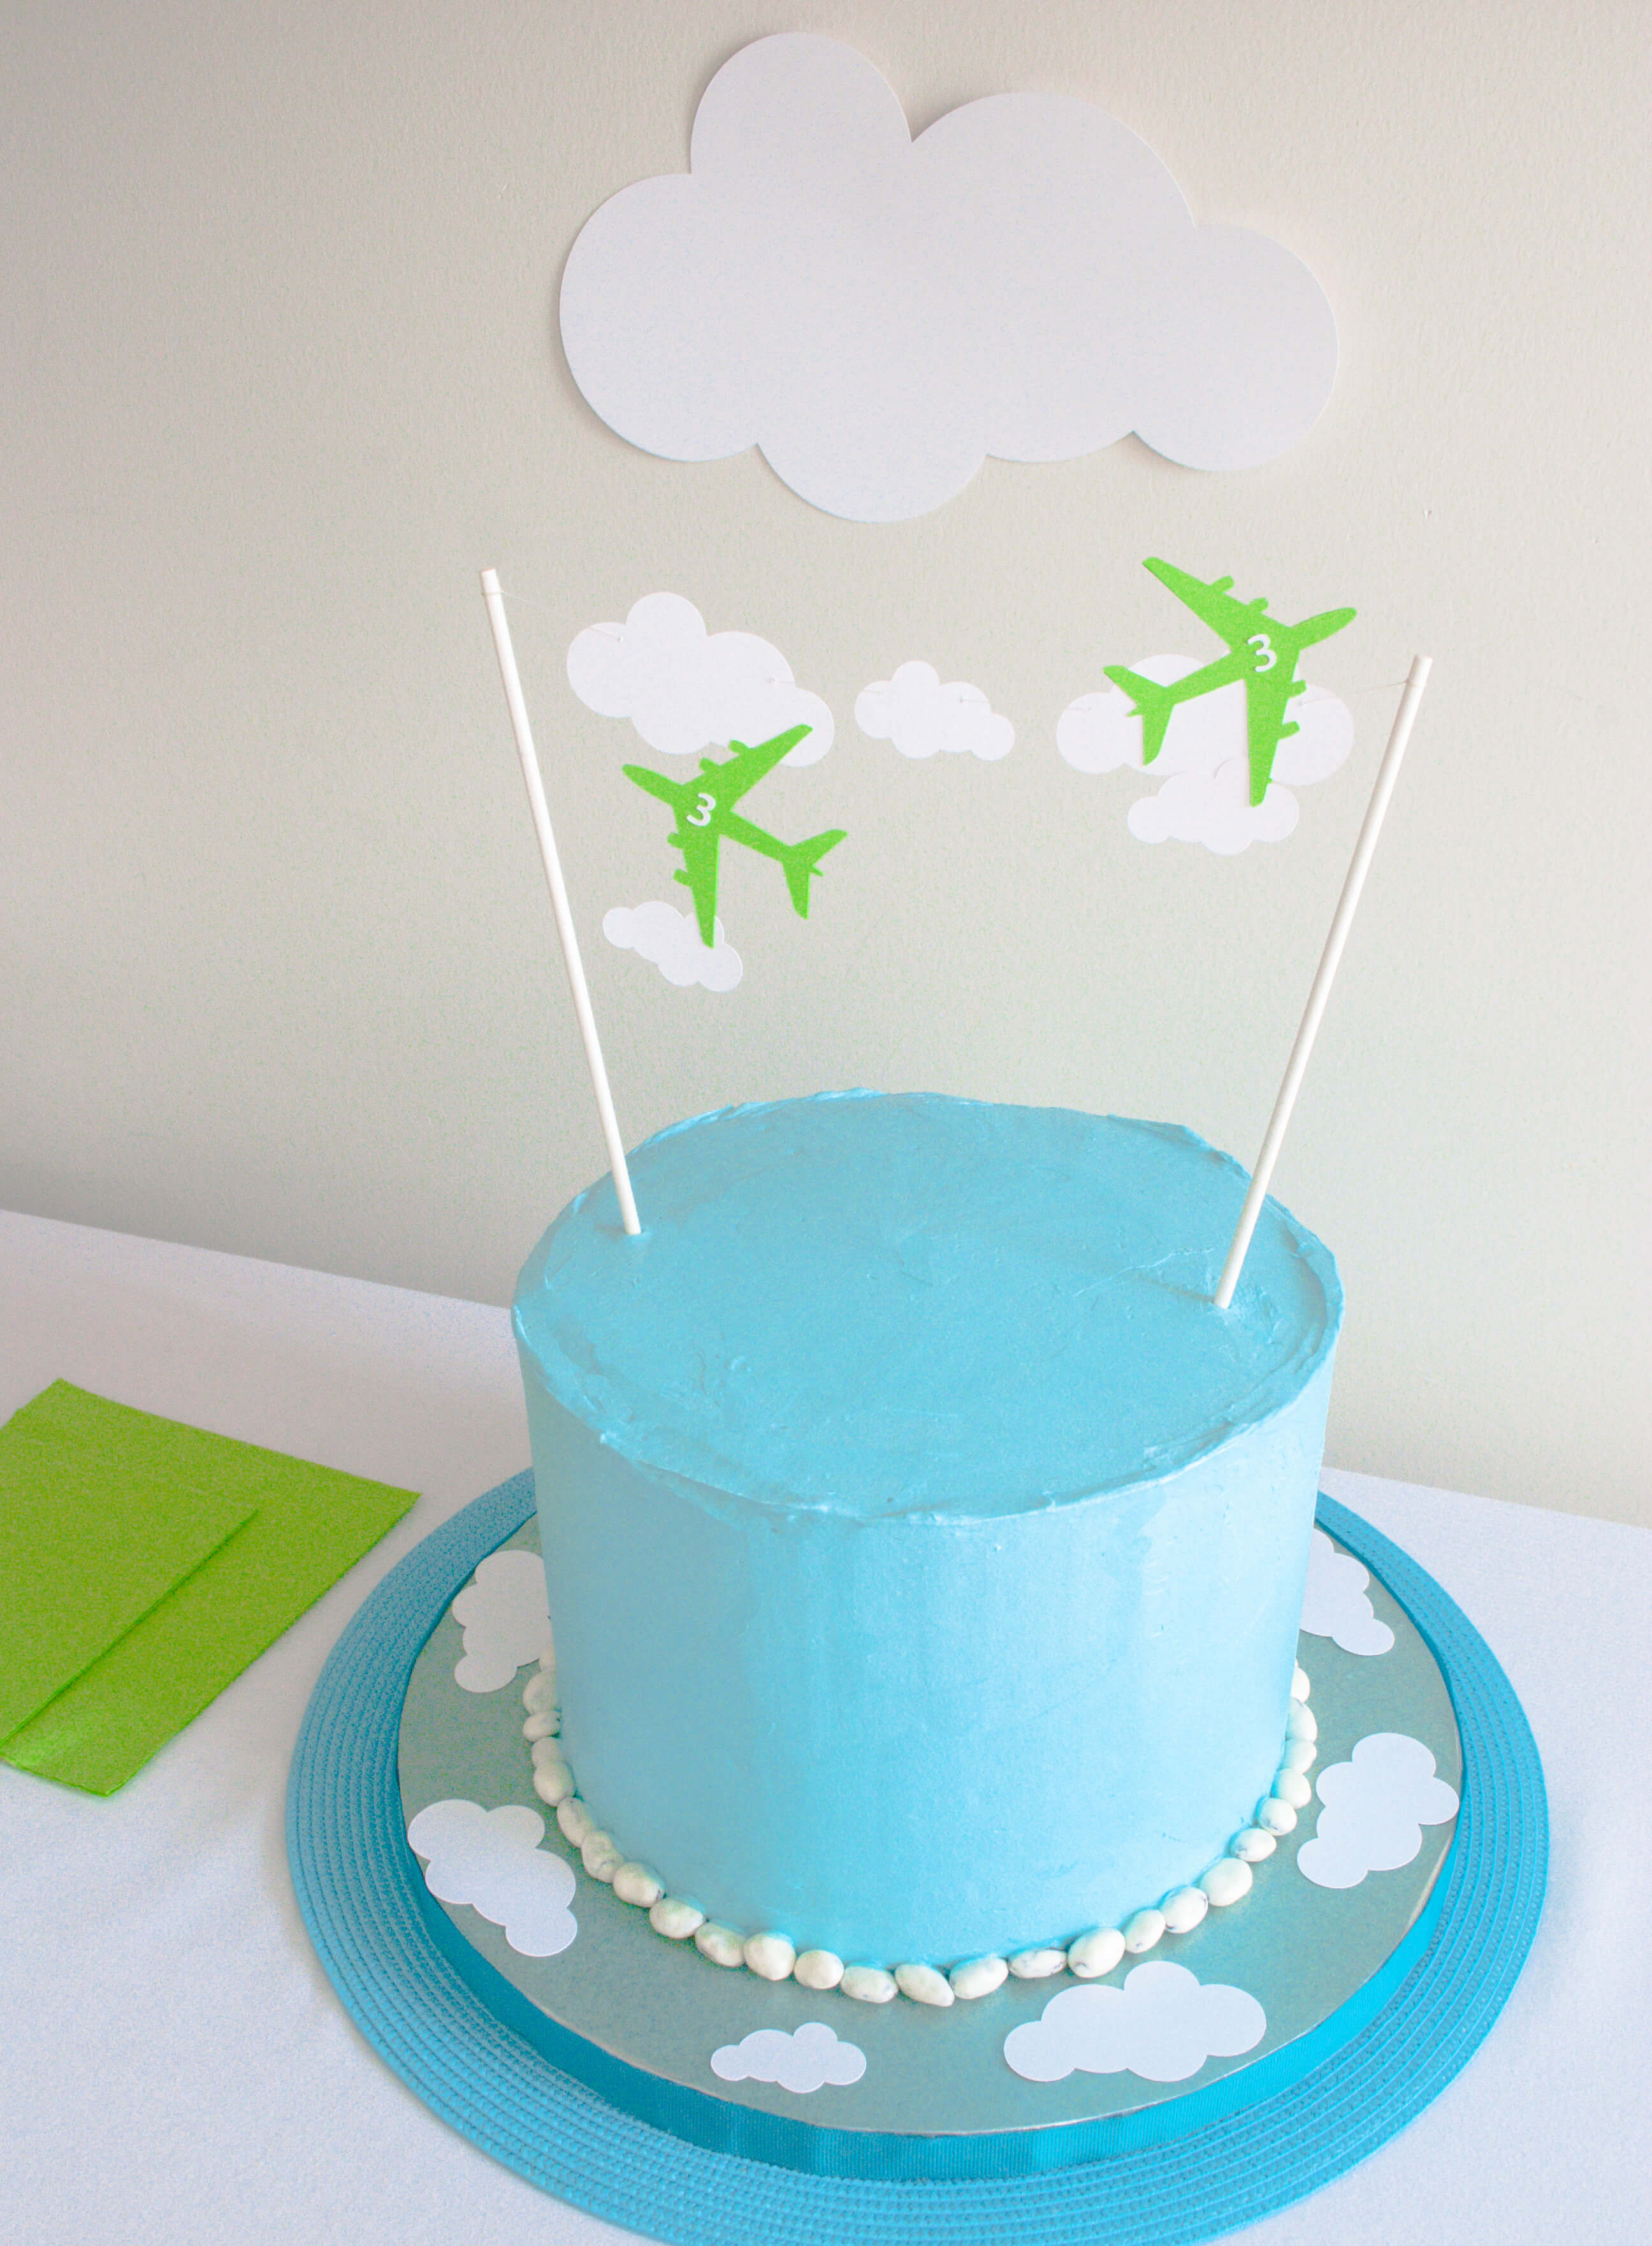 Easy Airplane Birthday Cake {plus Free Printable Airplane and Cloud Cake Toppers ...